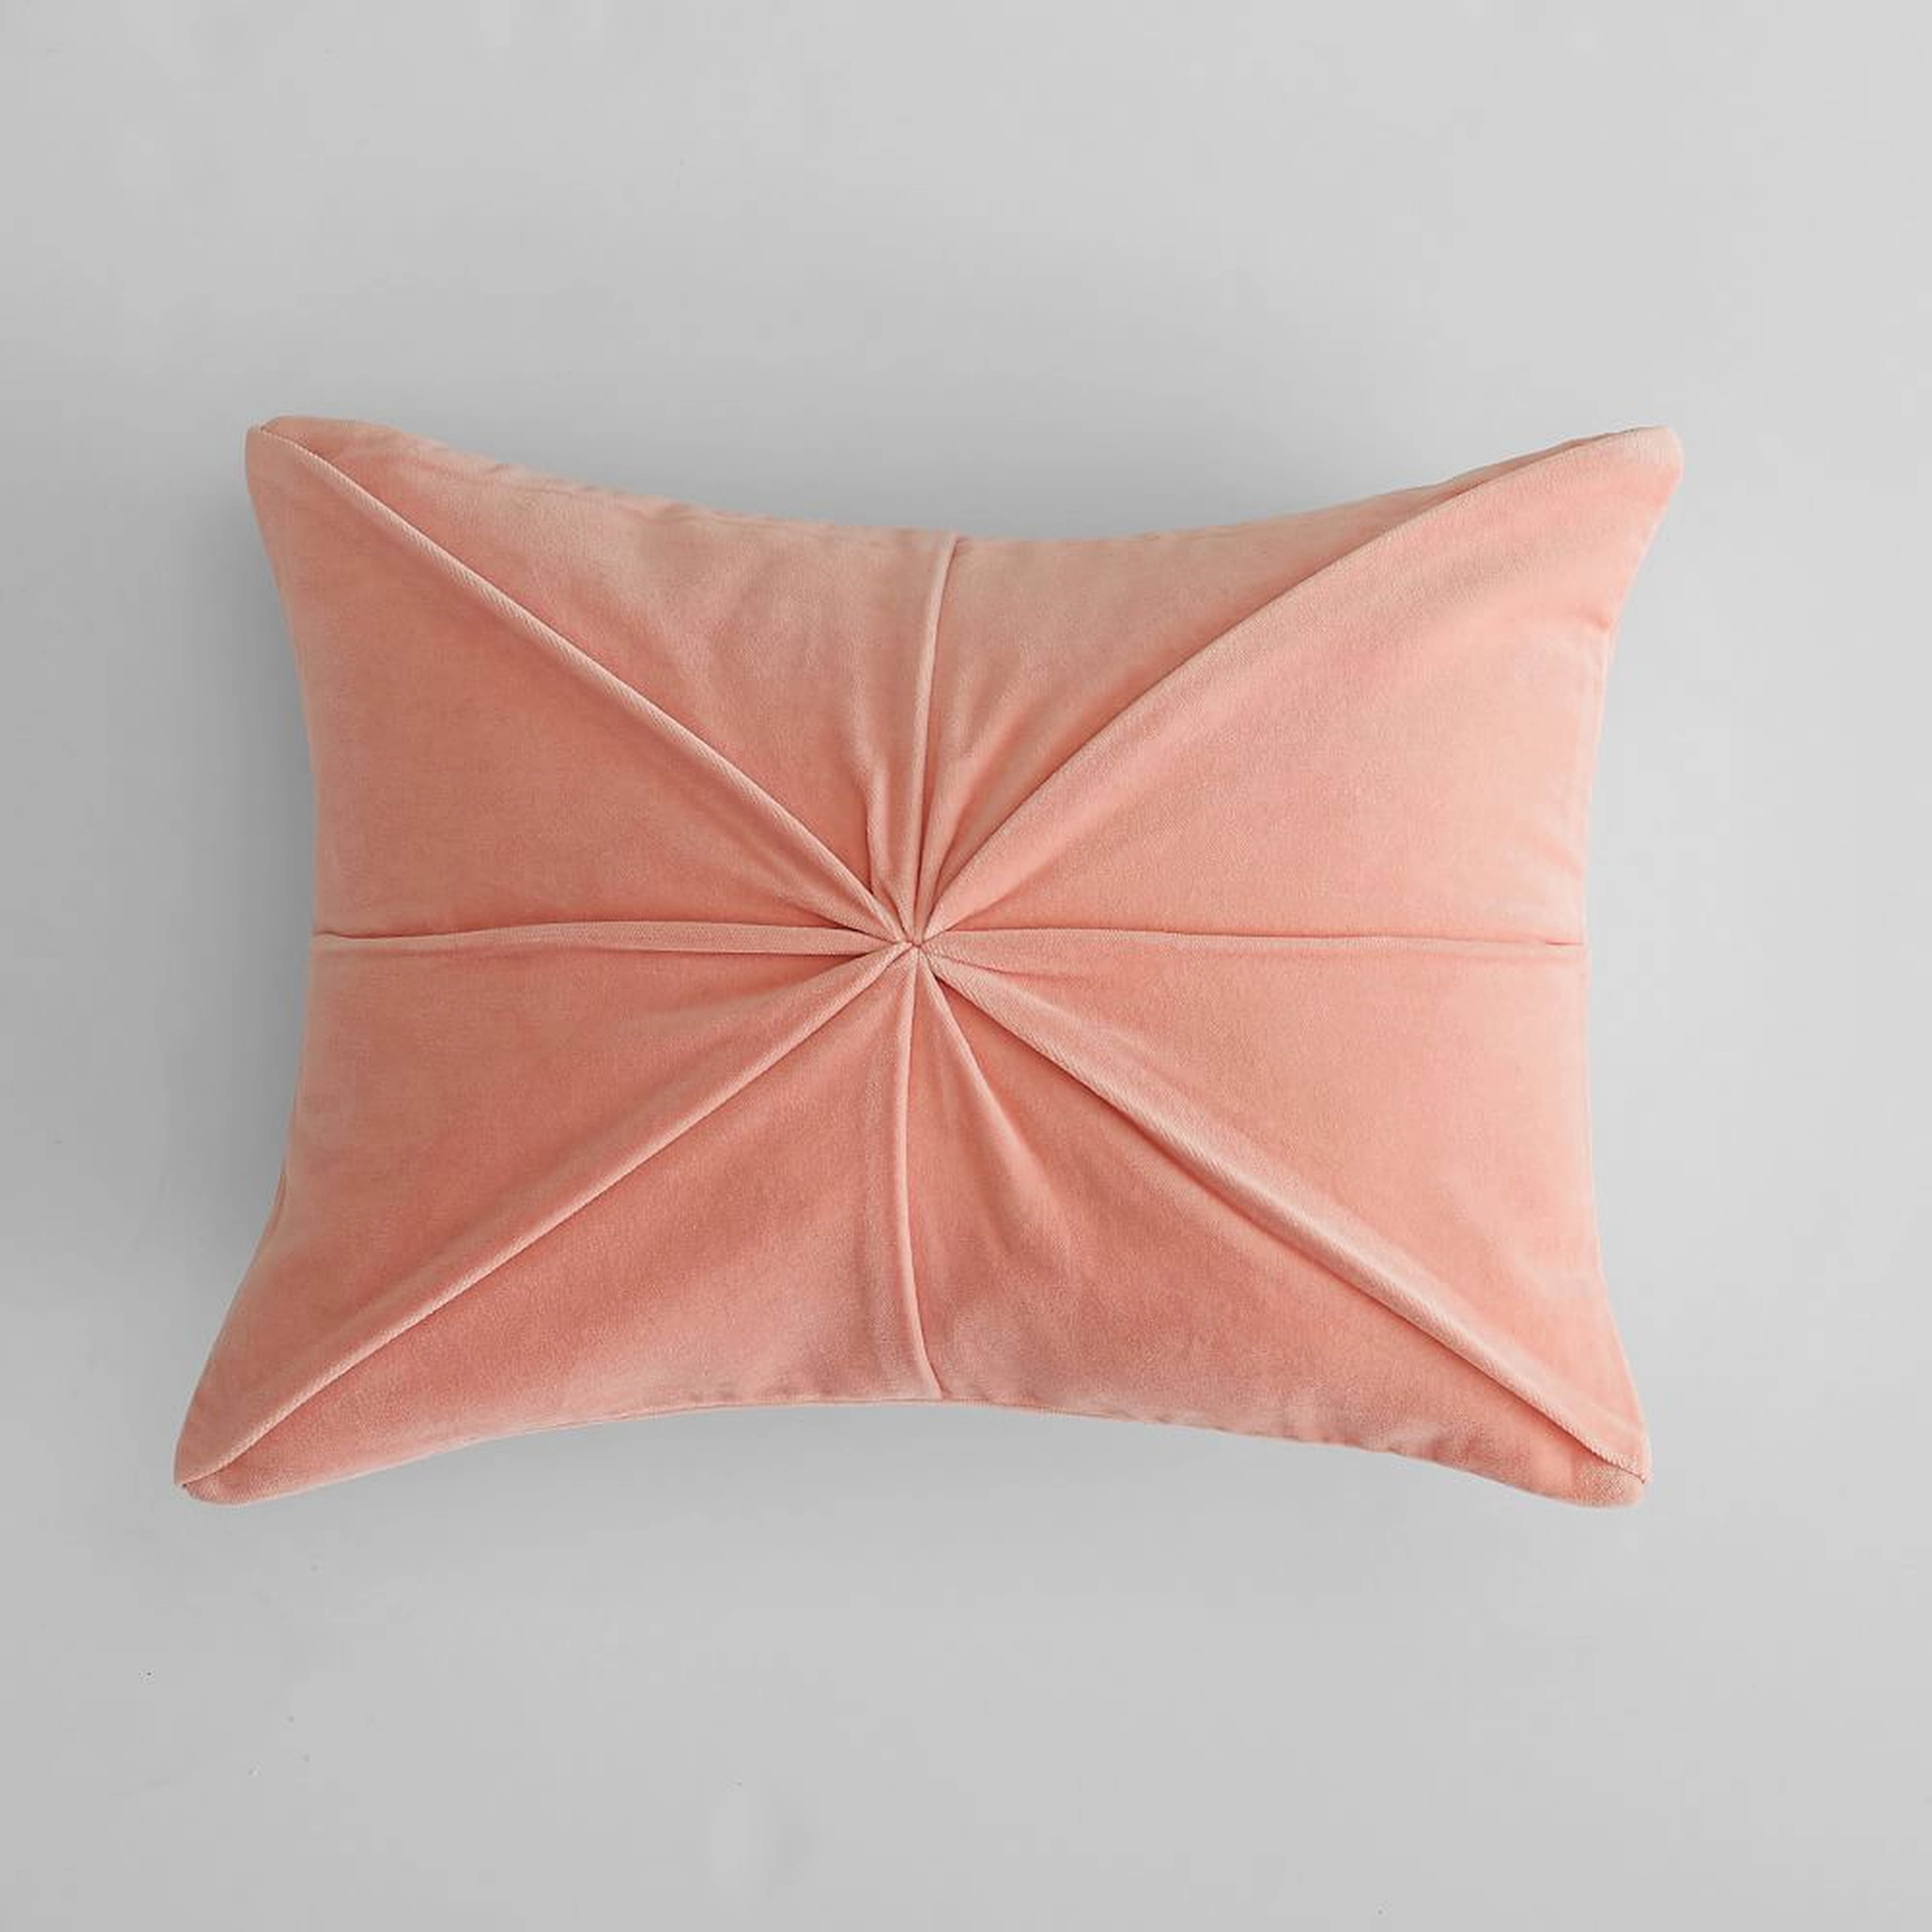 Knotted Velvet Pillow Cover, 12x16, Coral - Pottery Barn Teen